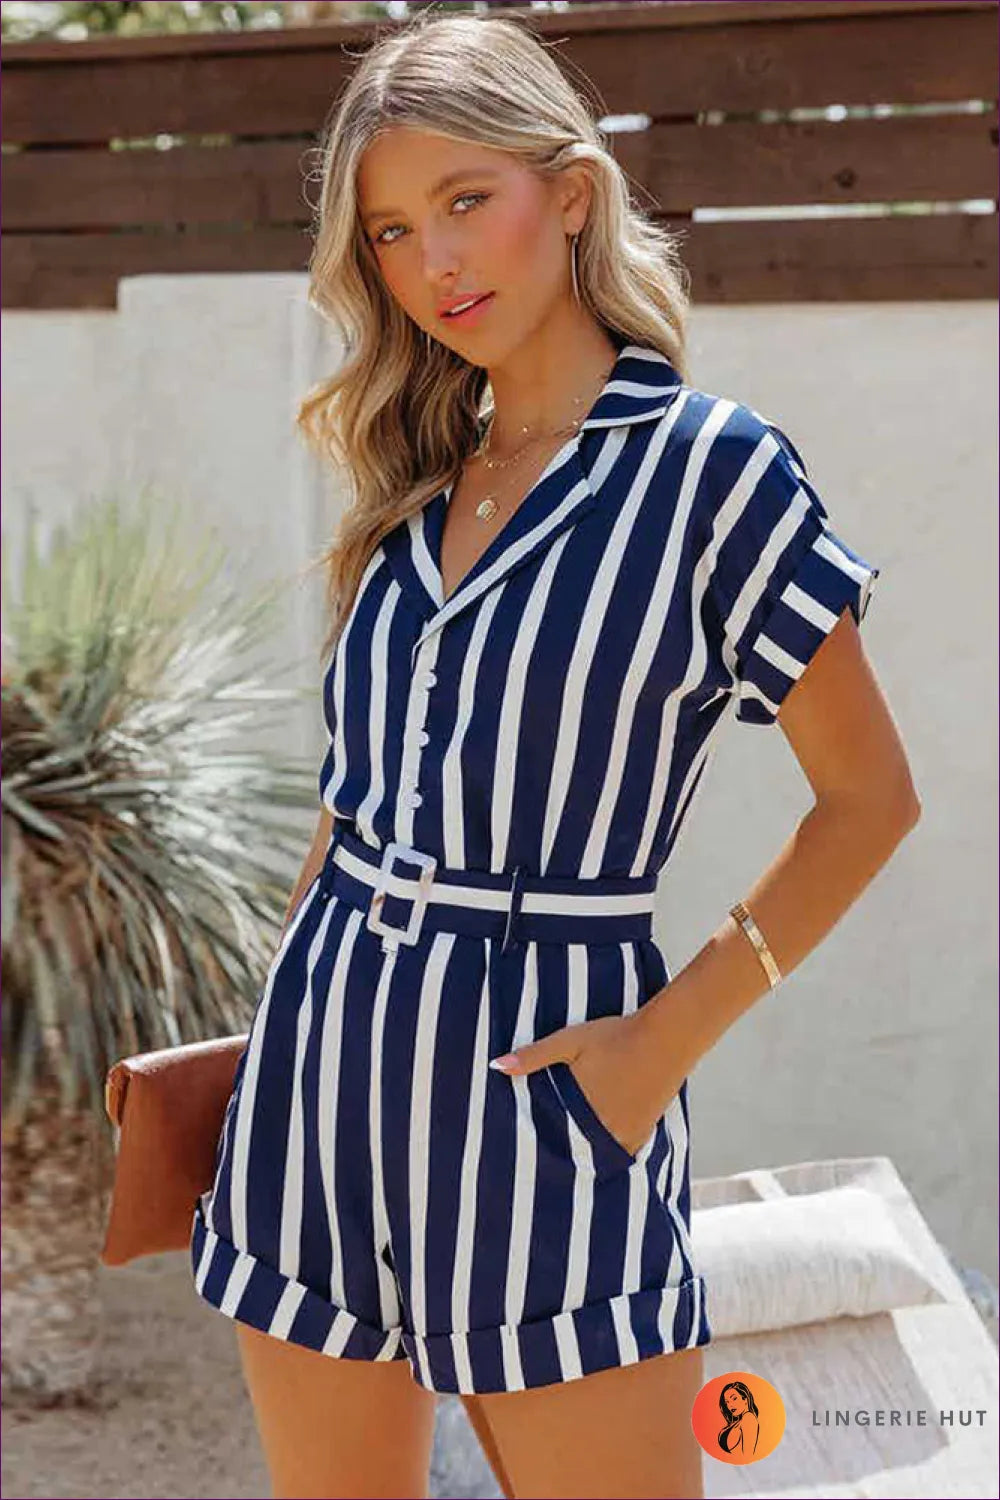 Effortless Summer Style With Our Striped Short Sleeve Lapel Jumpsuit - Versatile, Stylish, And Chic. Limited